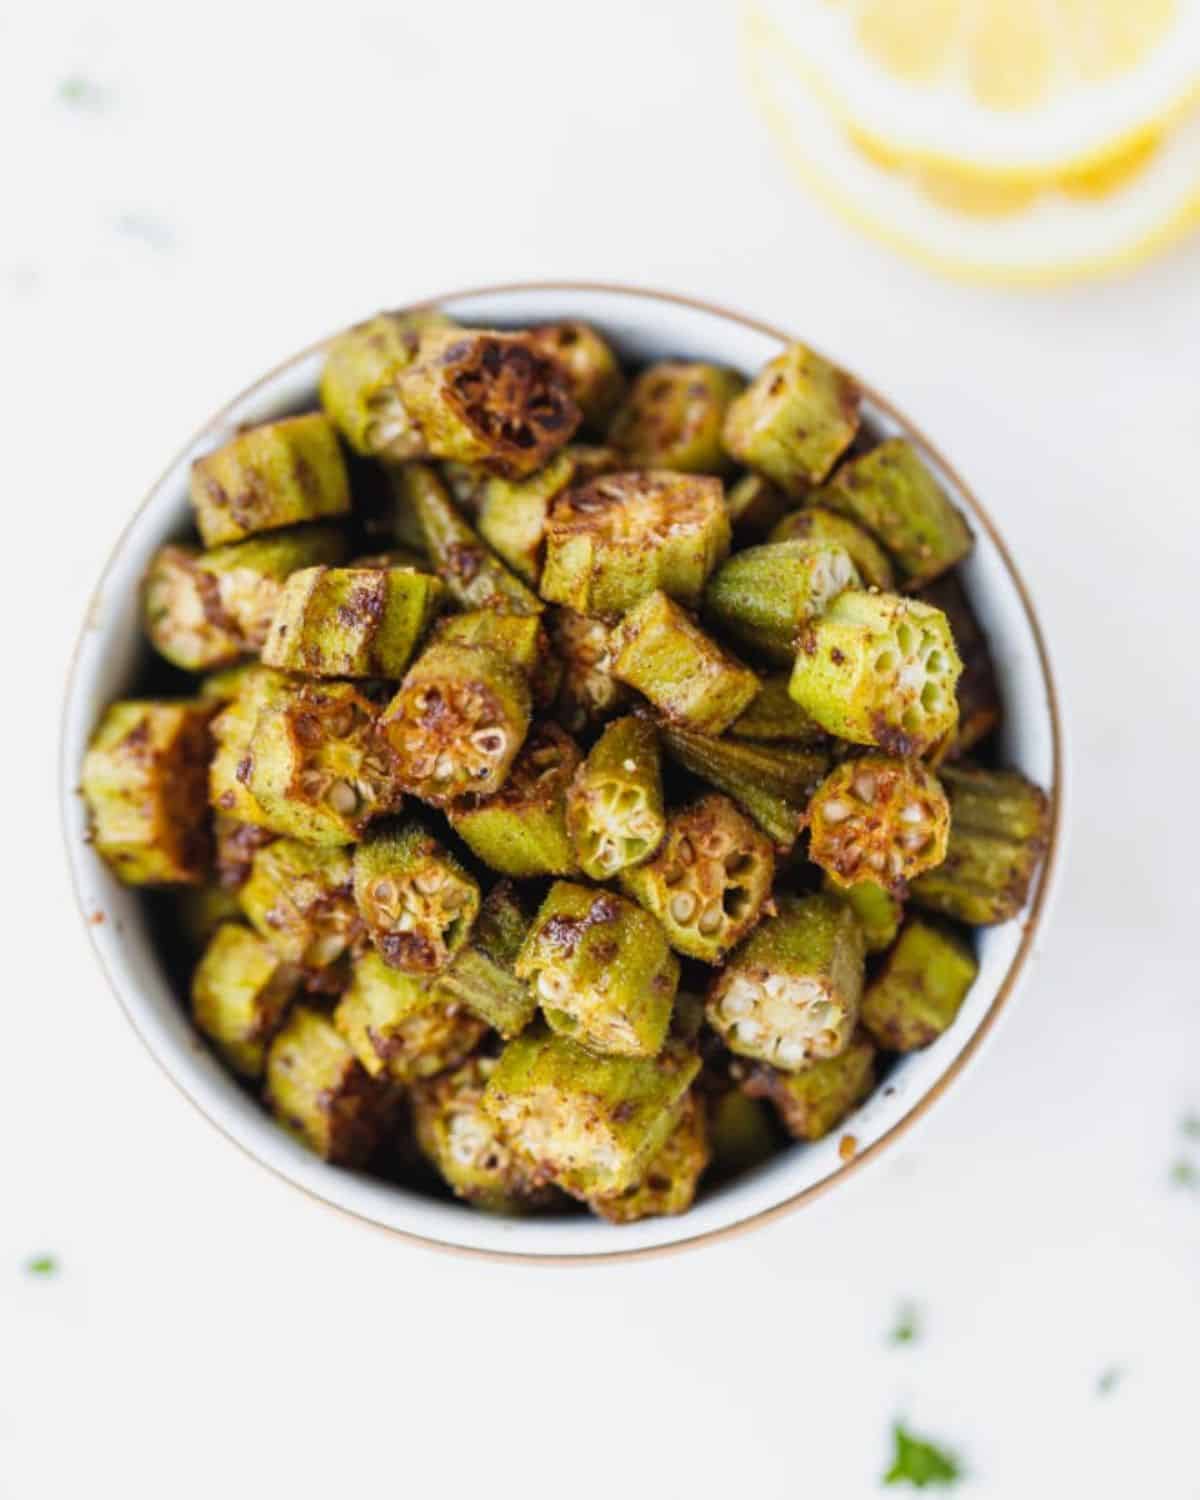 Healthy Oven-Baked Okra in a bowl.